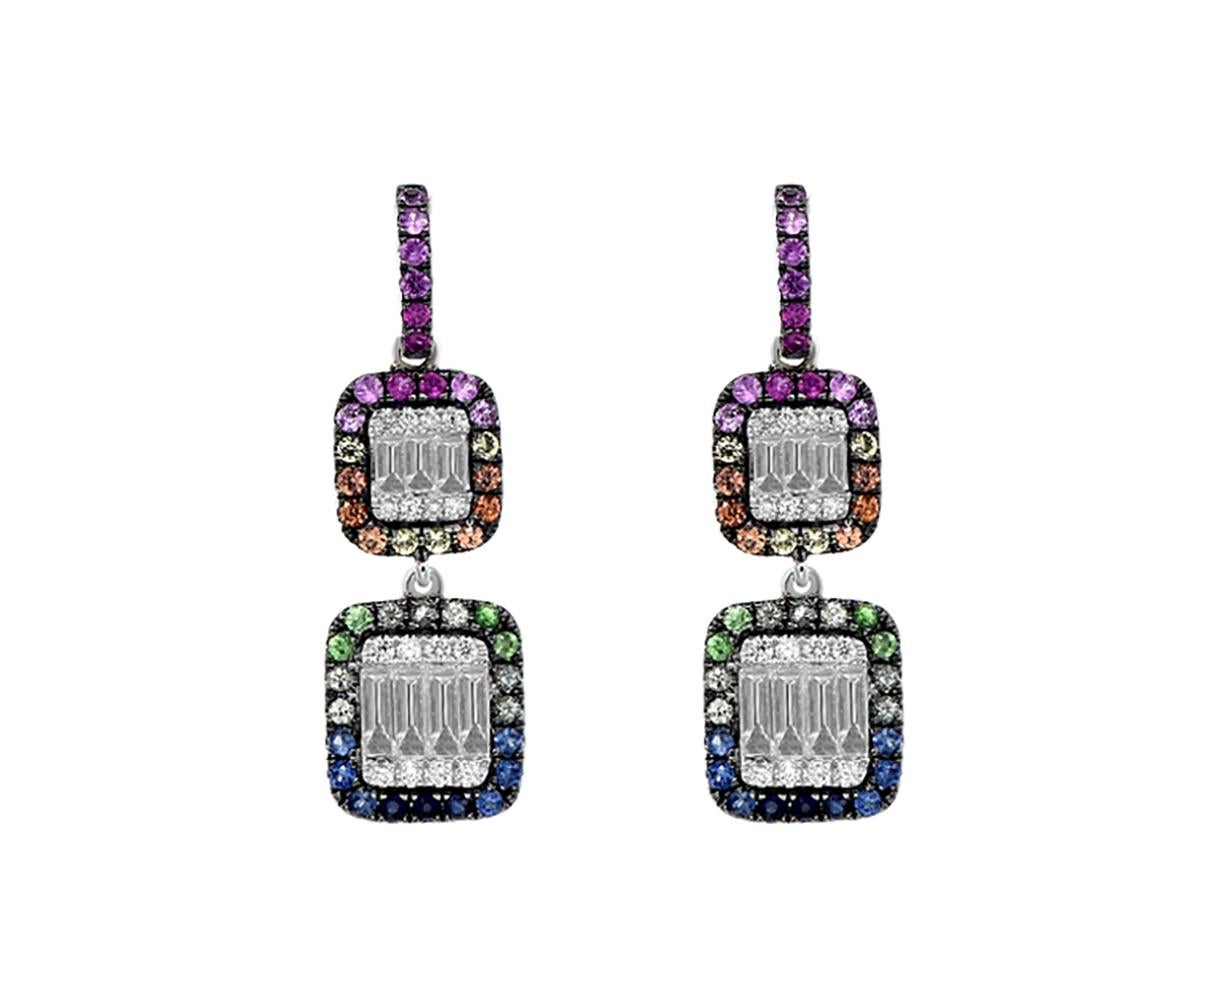 14K White Gold Multicolor Sapphire And Diamond Earrings featuring 0.81 Carats T.W. of Sapphires and 0.66 Carat T.W. Diamonds

Underline your look with this sharp 14K White Gold Diamond and Sapphire Earrings. High quality Diamonds and sapphires. This